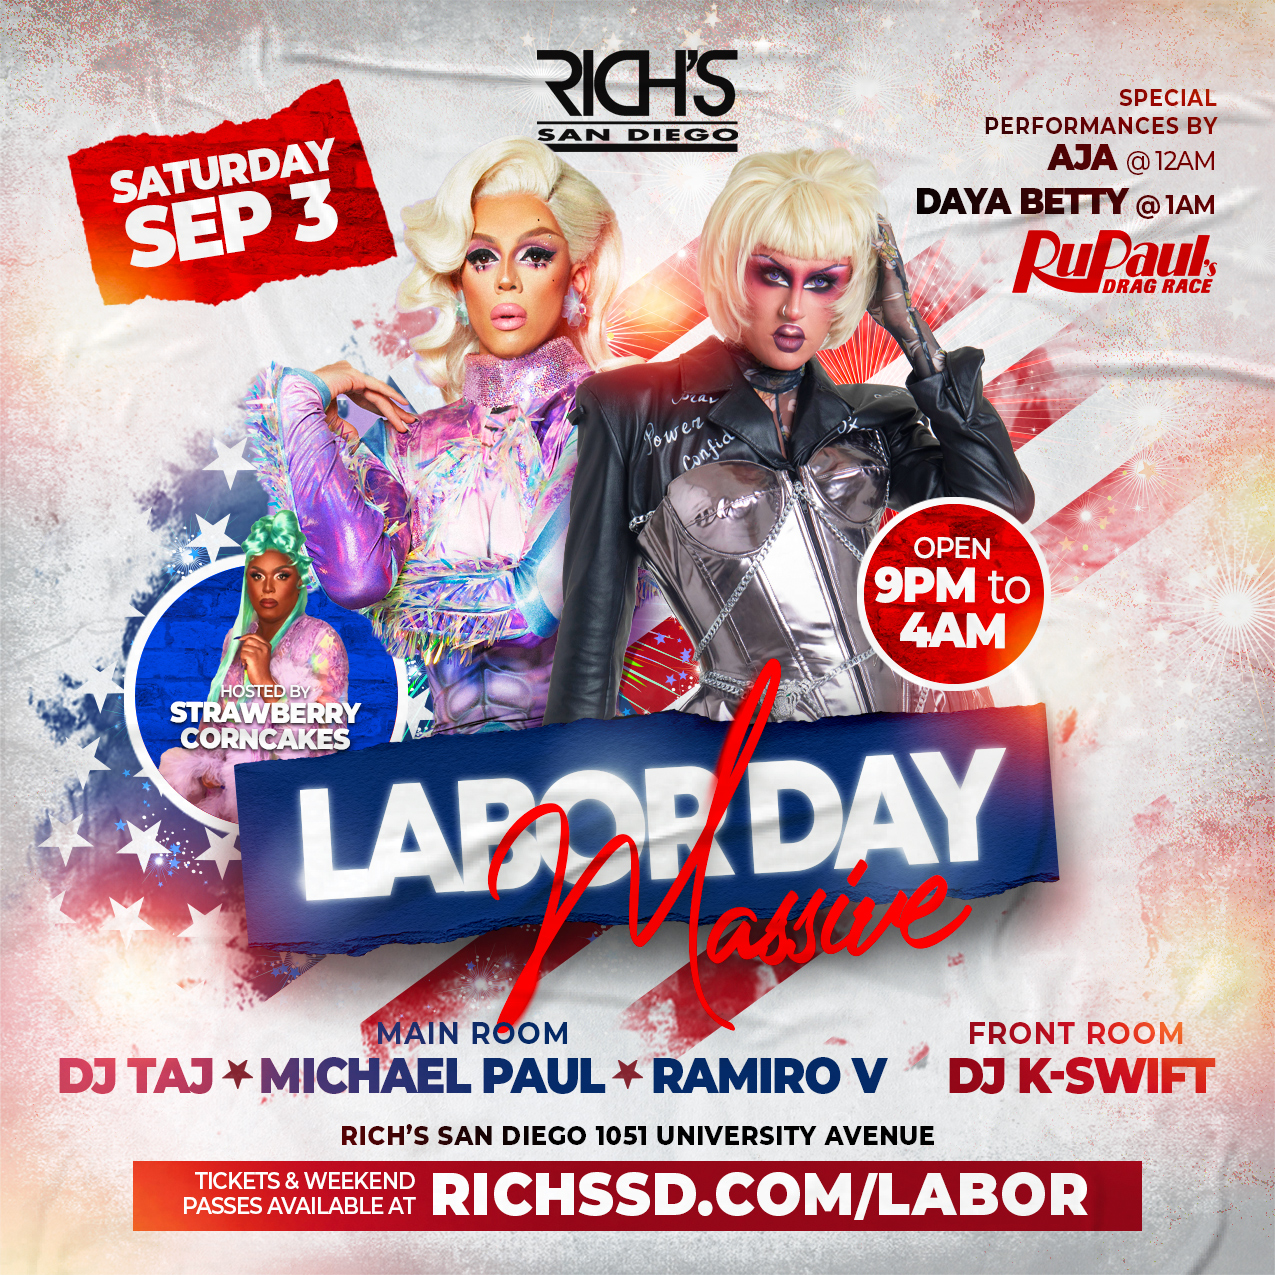 Buy Tickets to Labor Day Massive Weekend! in San Diego on Sep 02, 2022